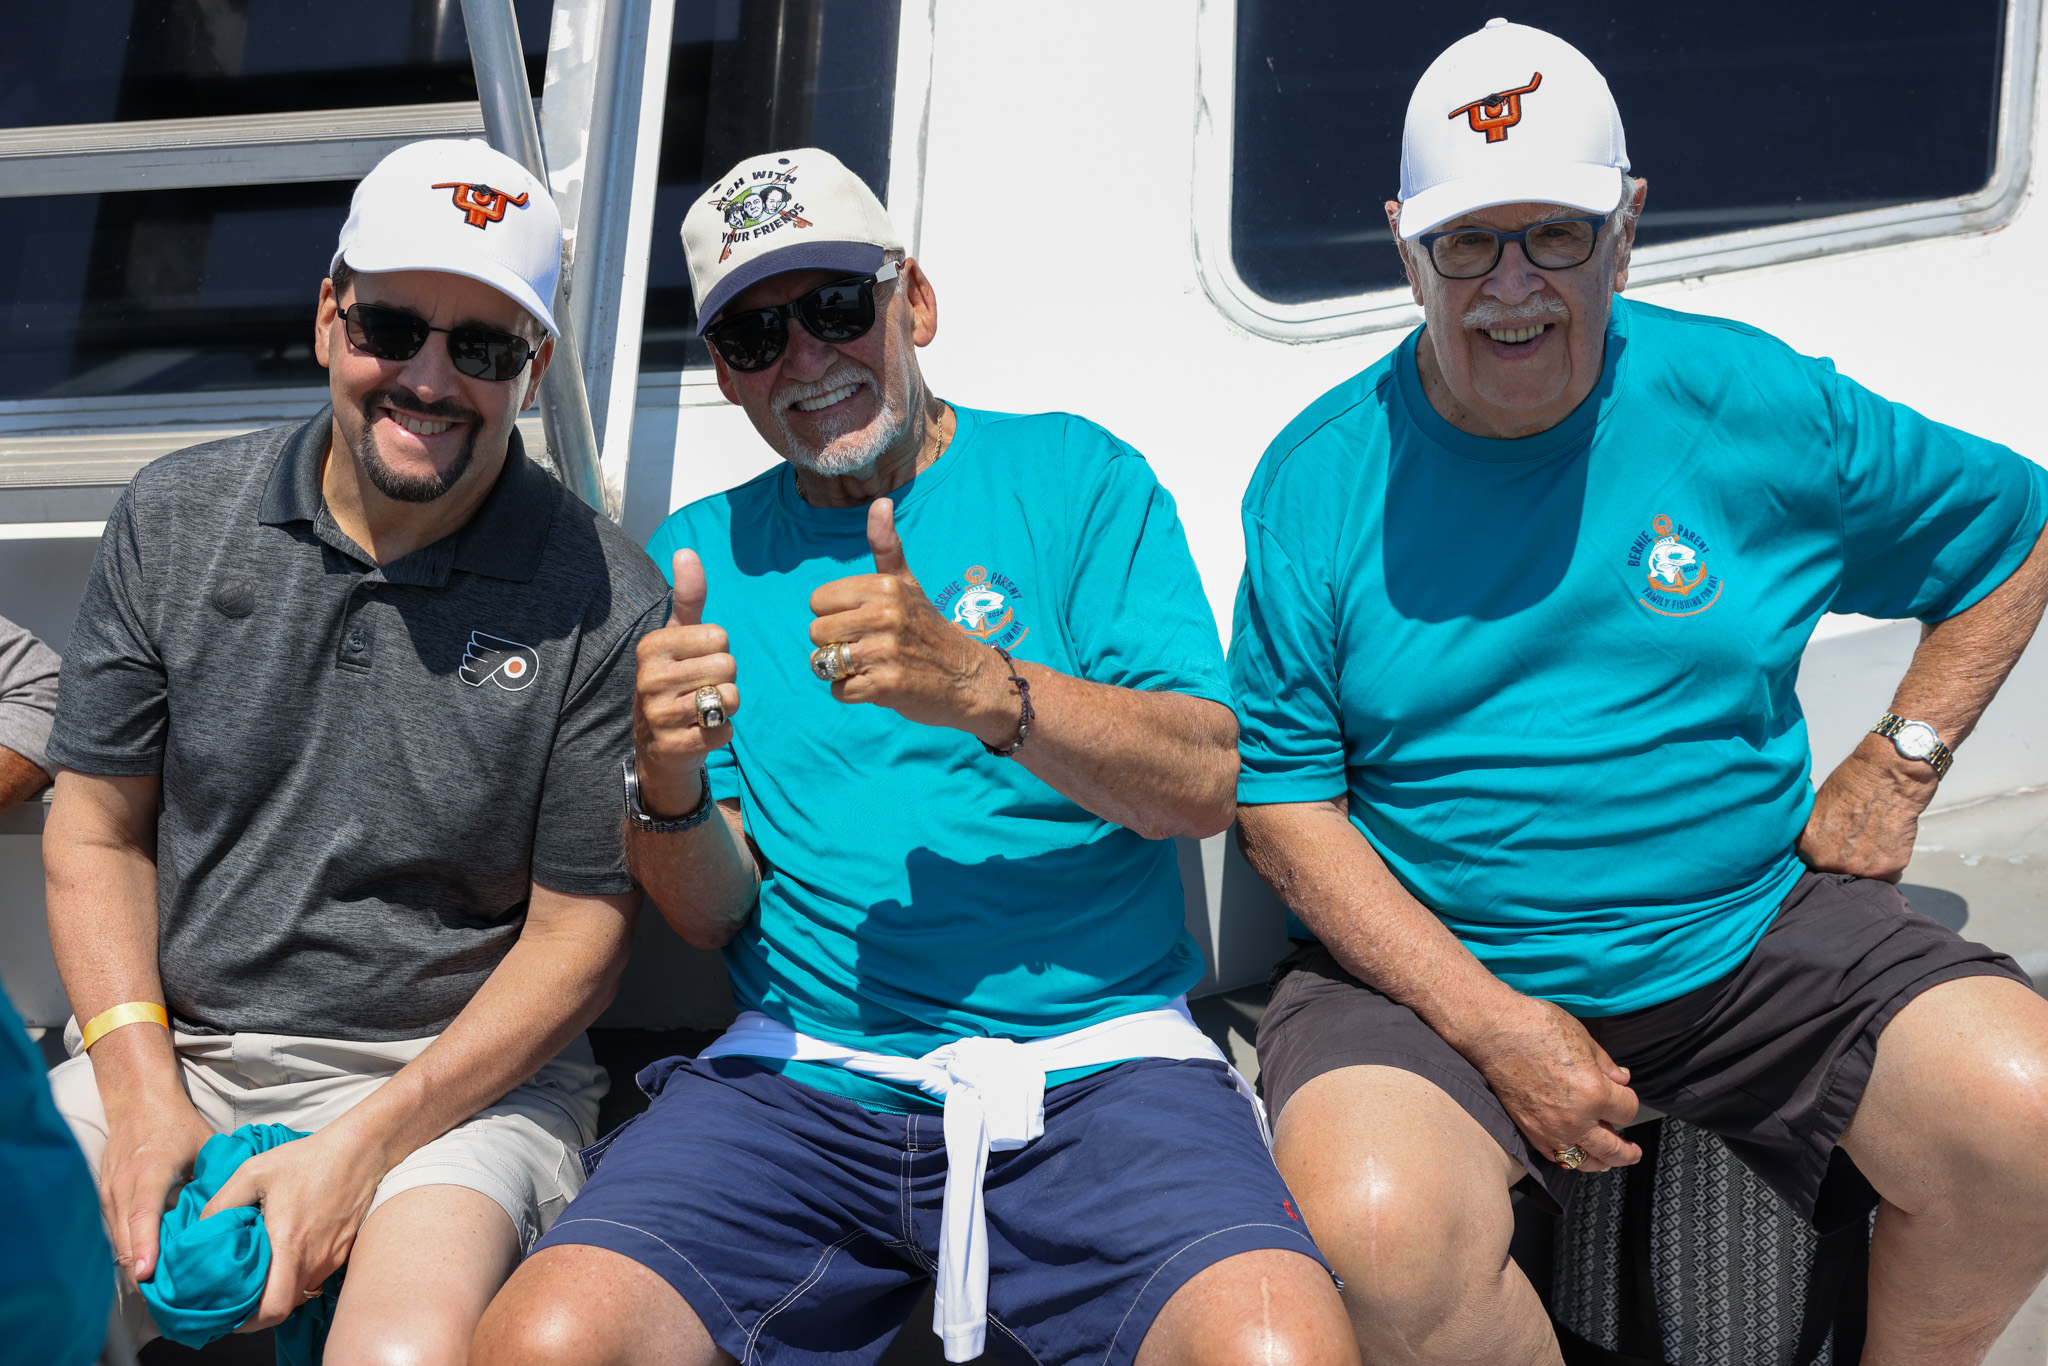 Anglers and Supporters of Snider Raise Over $60,000 for Snider Youth during Bernie Parent’s Family Fishing Day